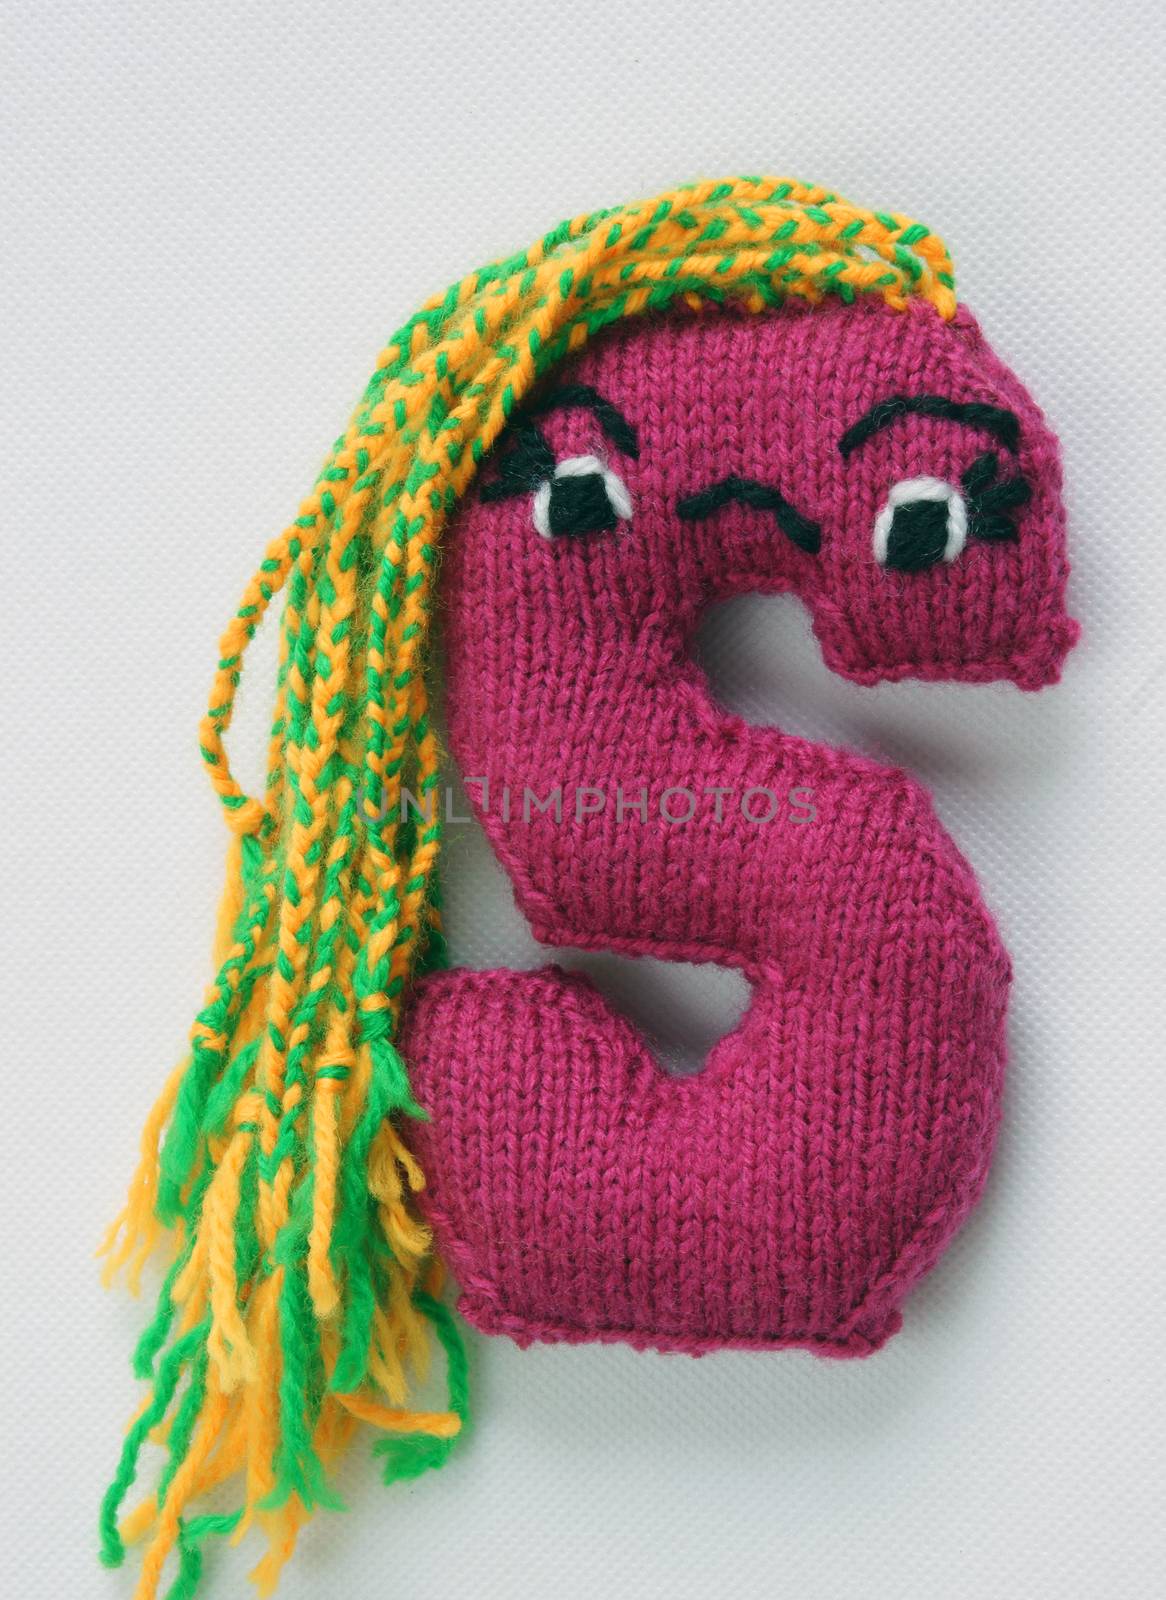 Amazing alpahbet on white background, knitted letter with emotion on face, feel with handmade toy, abc background with abstract hair